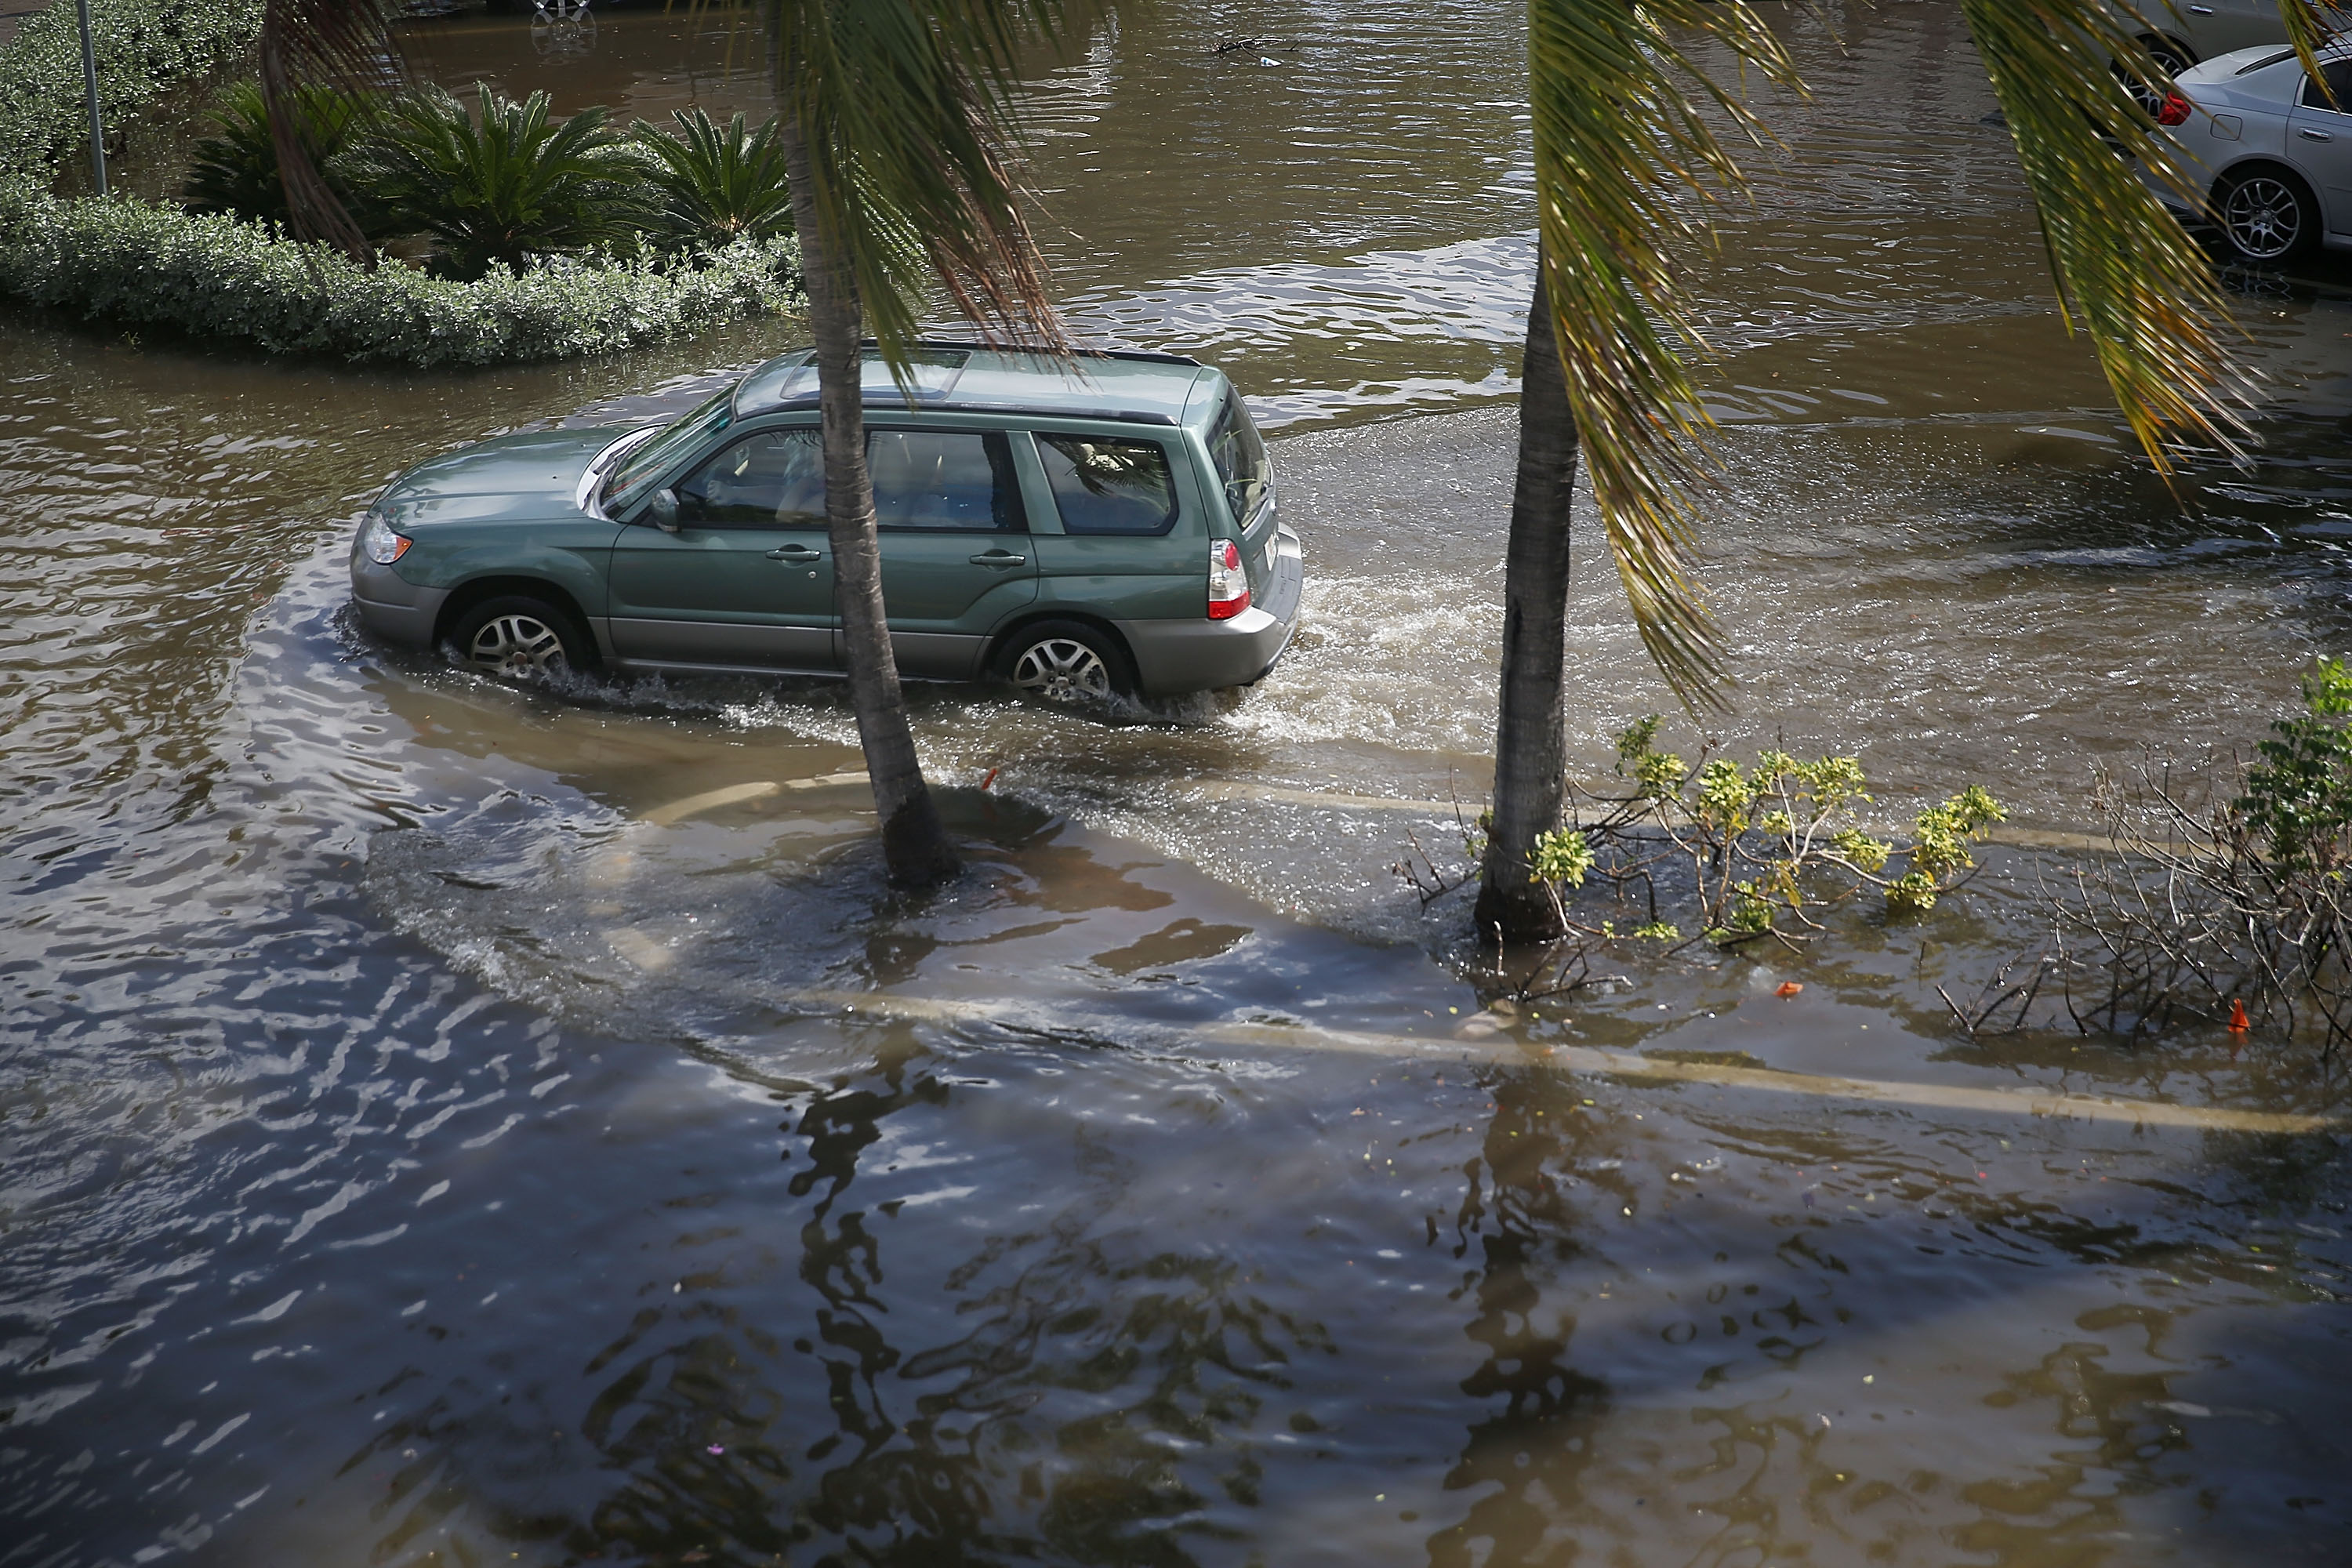 A vehicle drives through flooded streets caused by the combination of the lunar orbit, which caused seasonal high tides, and rising sea levels due to climate change on September 30, 2015 in Fort Lauderdale, Florida. (Joe Raedle&mdash;Getty Images)